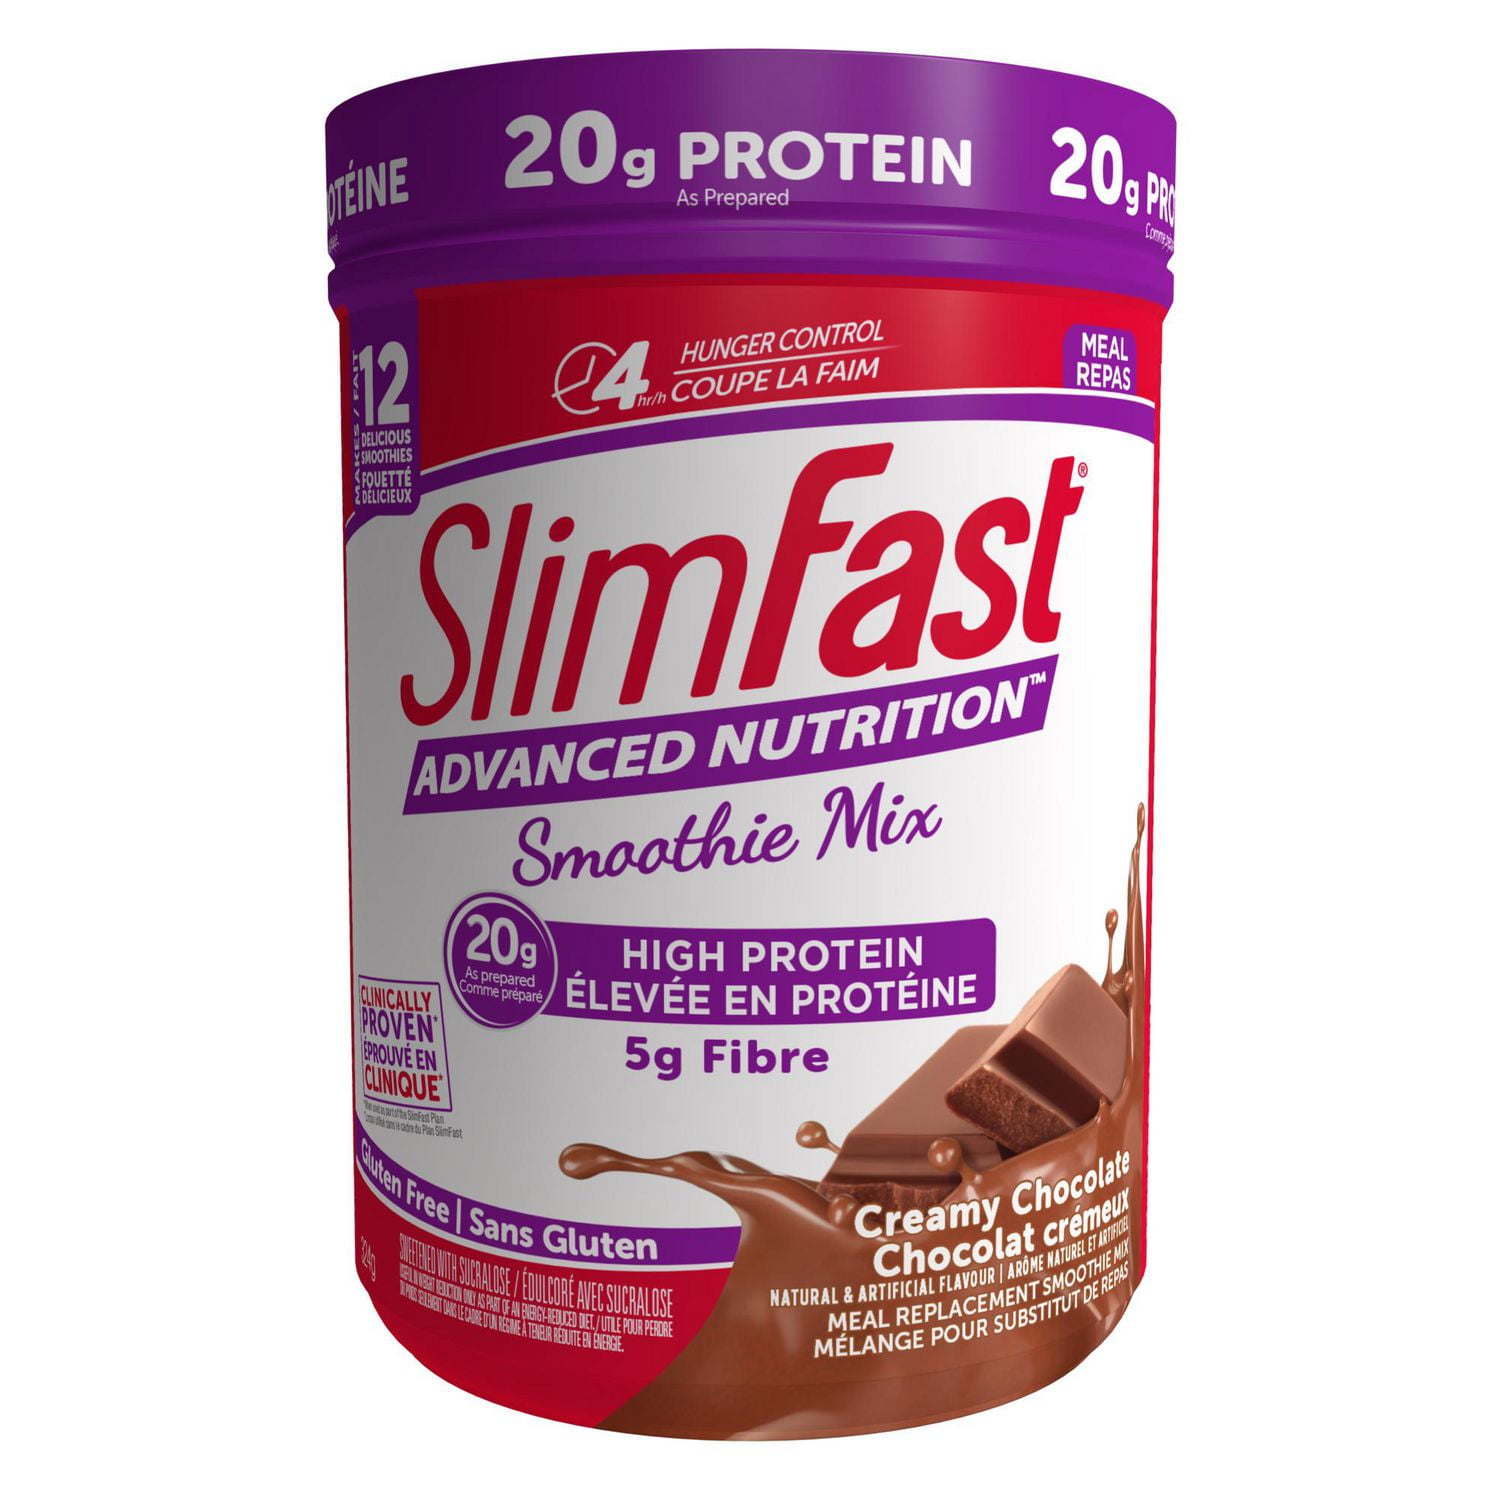 Does Slim-Fast Work?: A History Lesson of the Meal-Replacement Shake